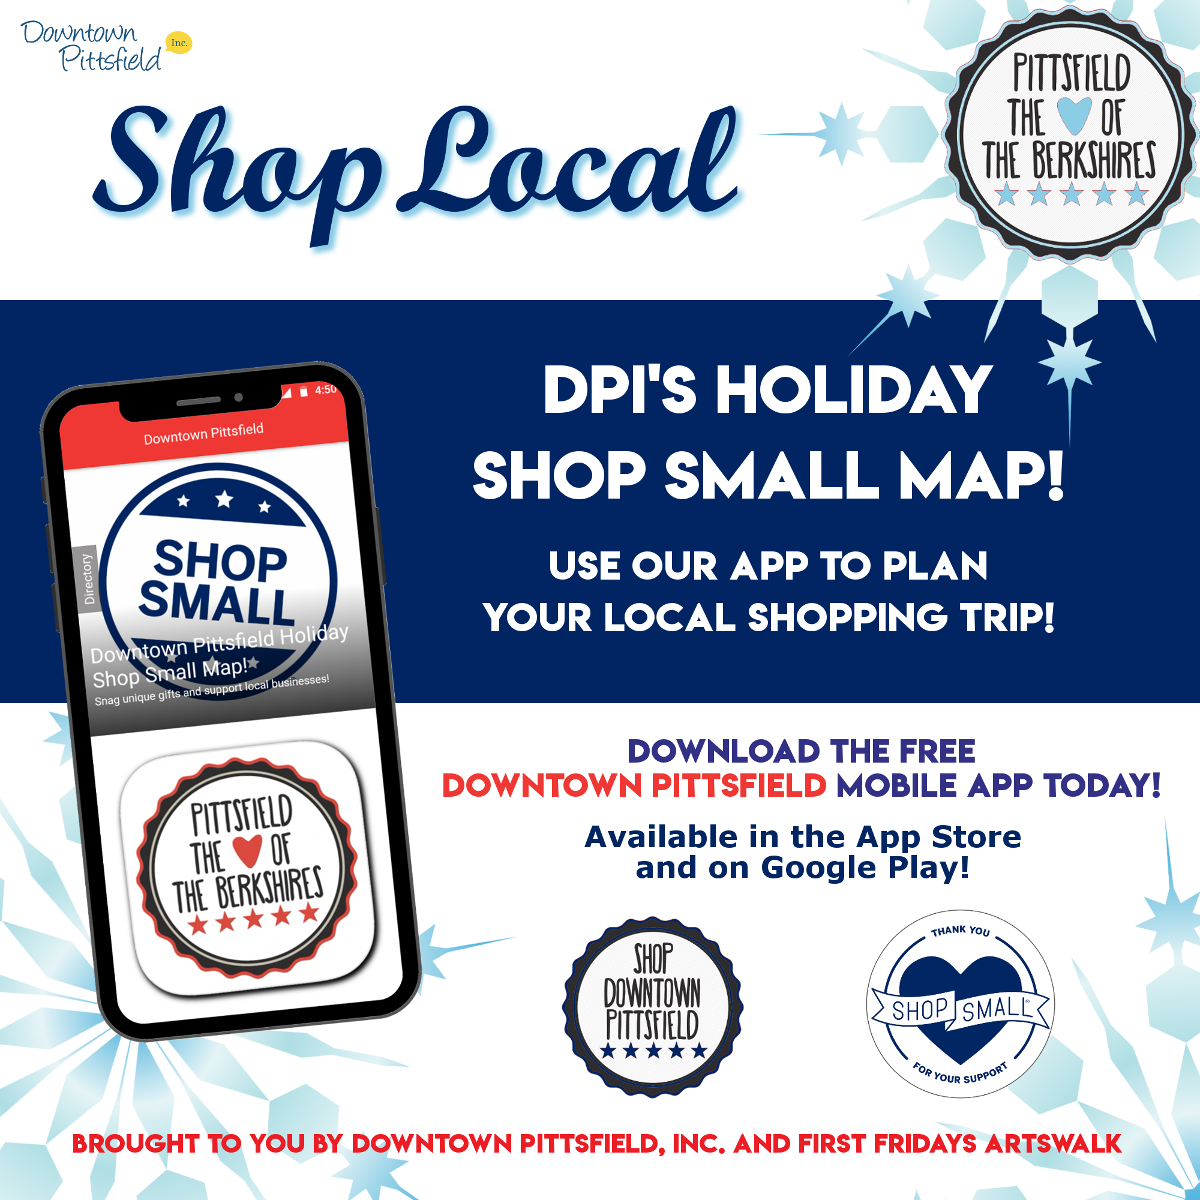 Downtown Pittsfield Holiday Shop Small Map